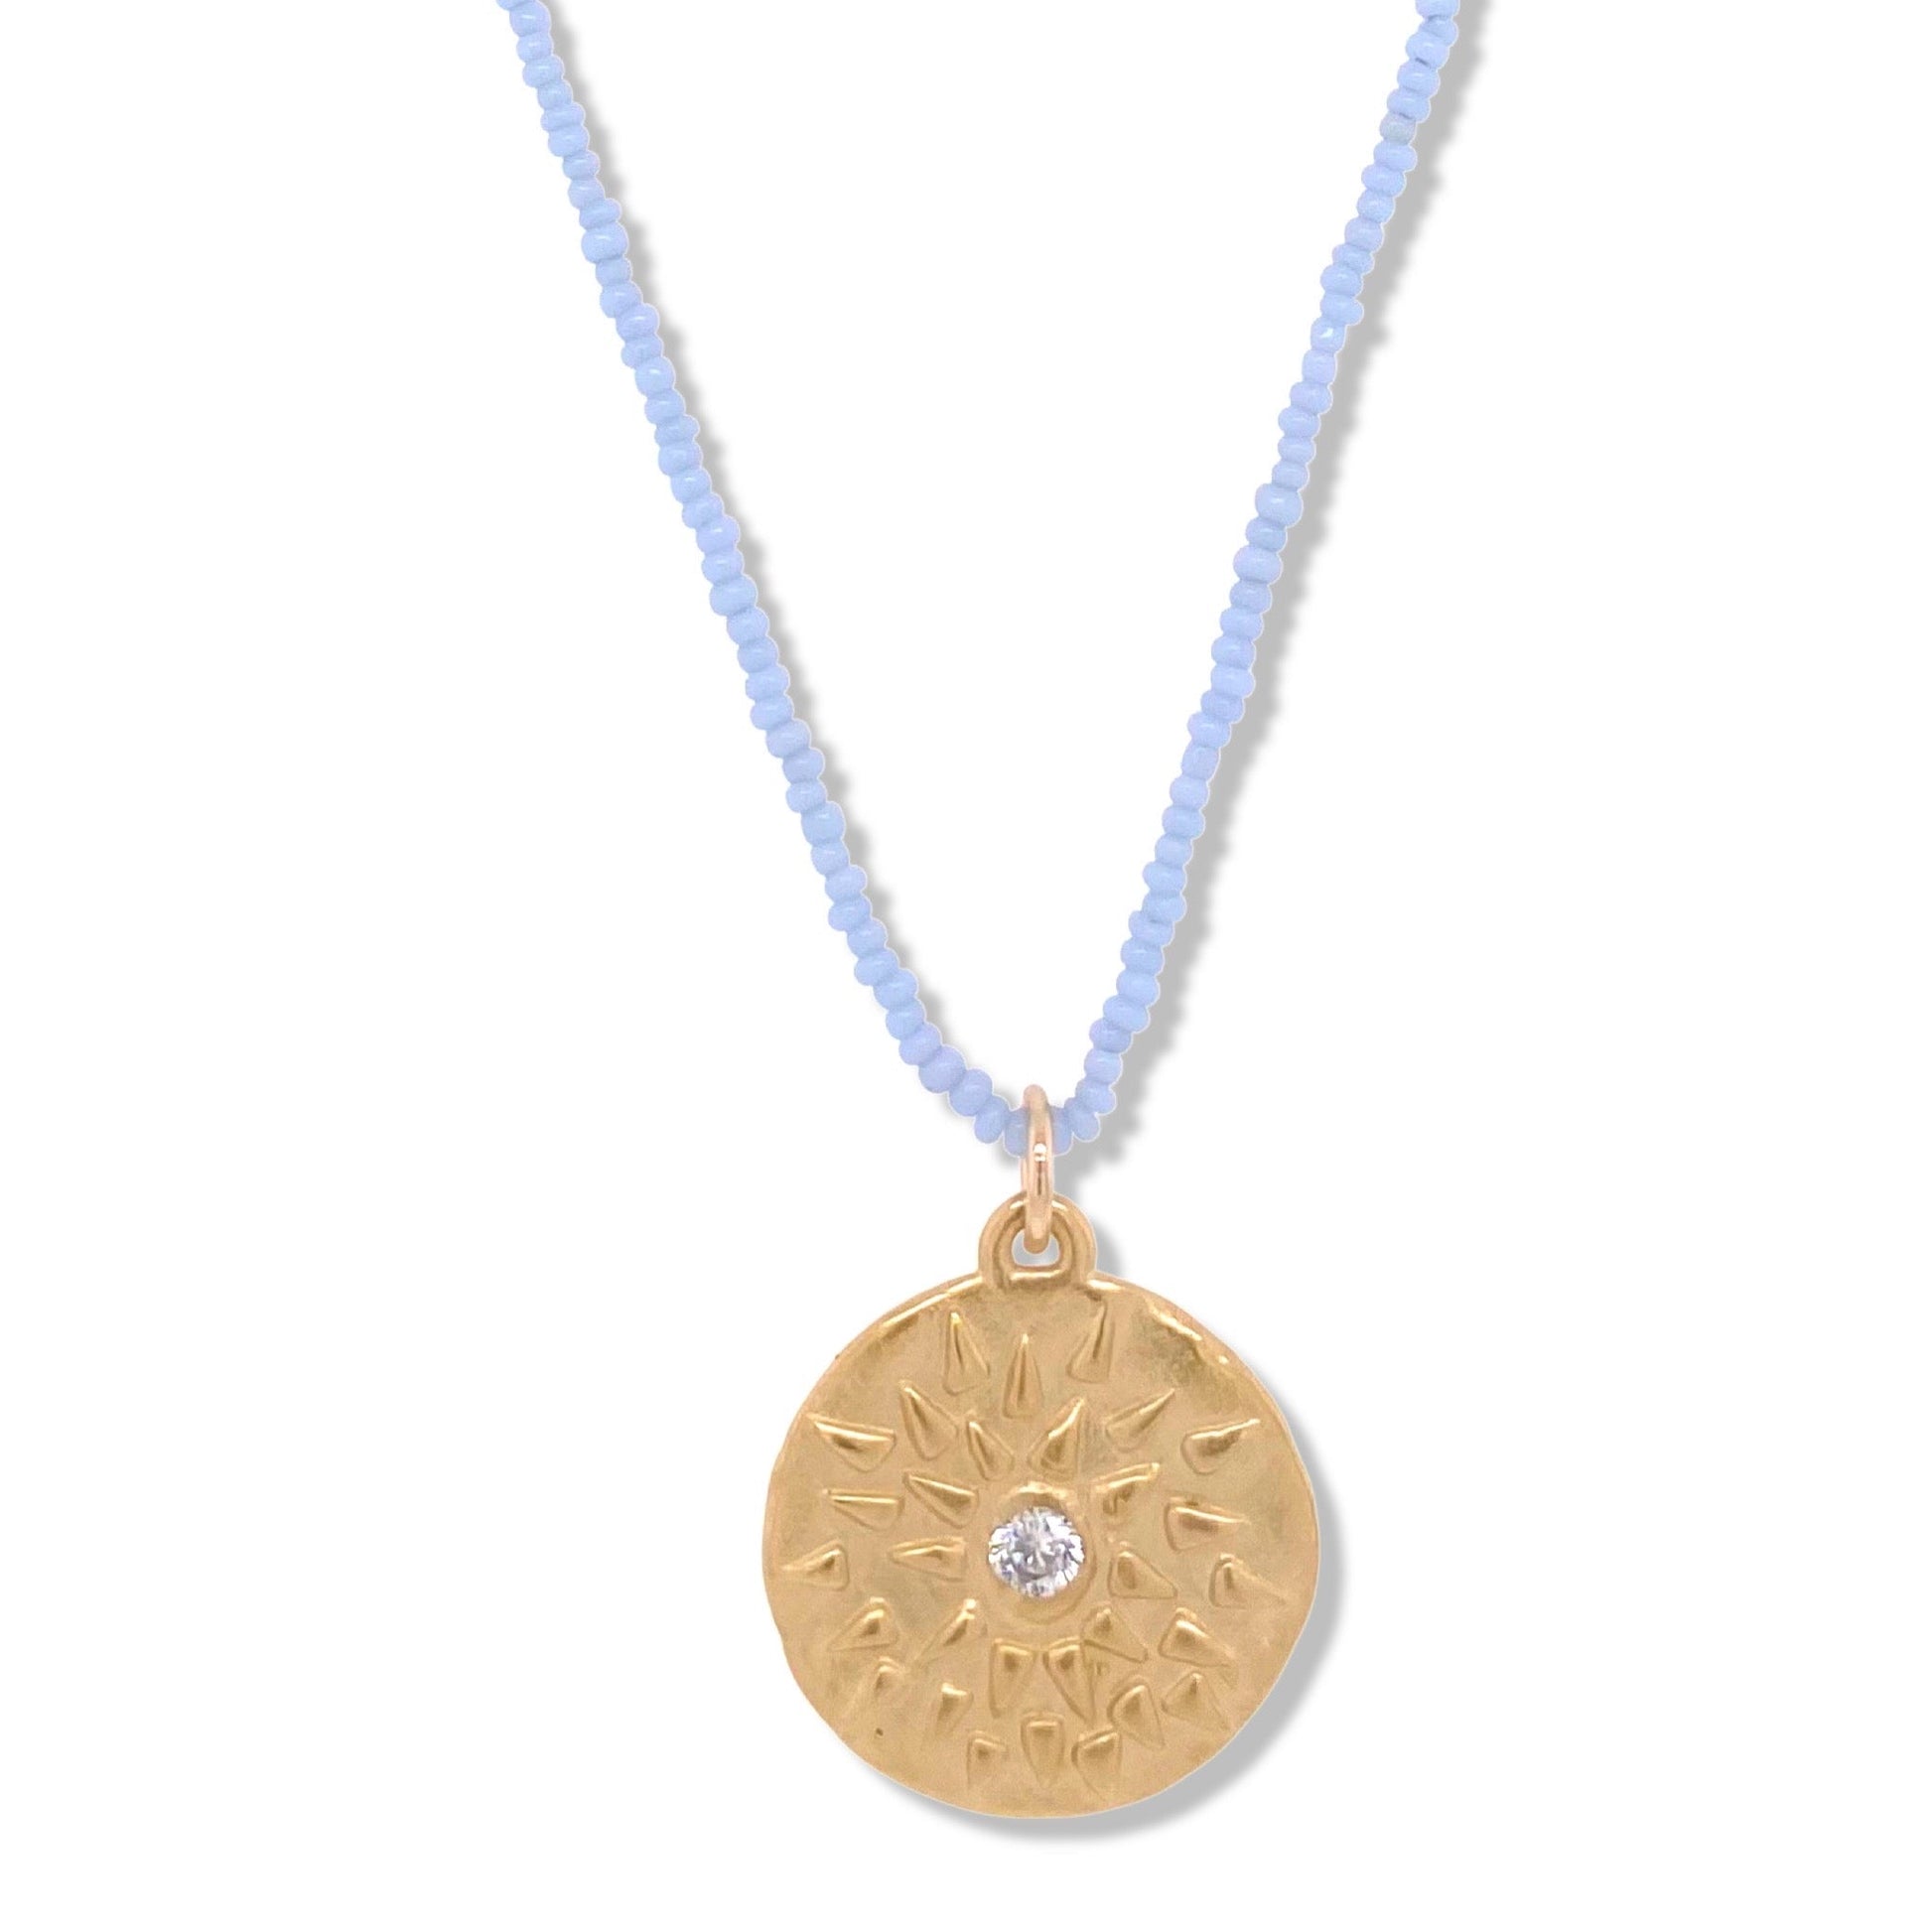 Mira Necklace in Gold on Baby Blue Tiny Beads | Nalu | Nantucket